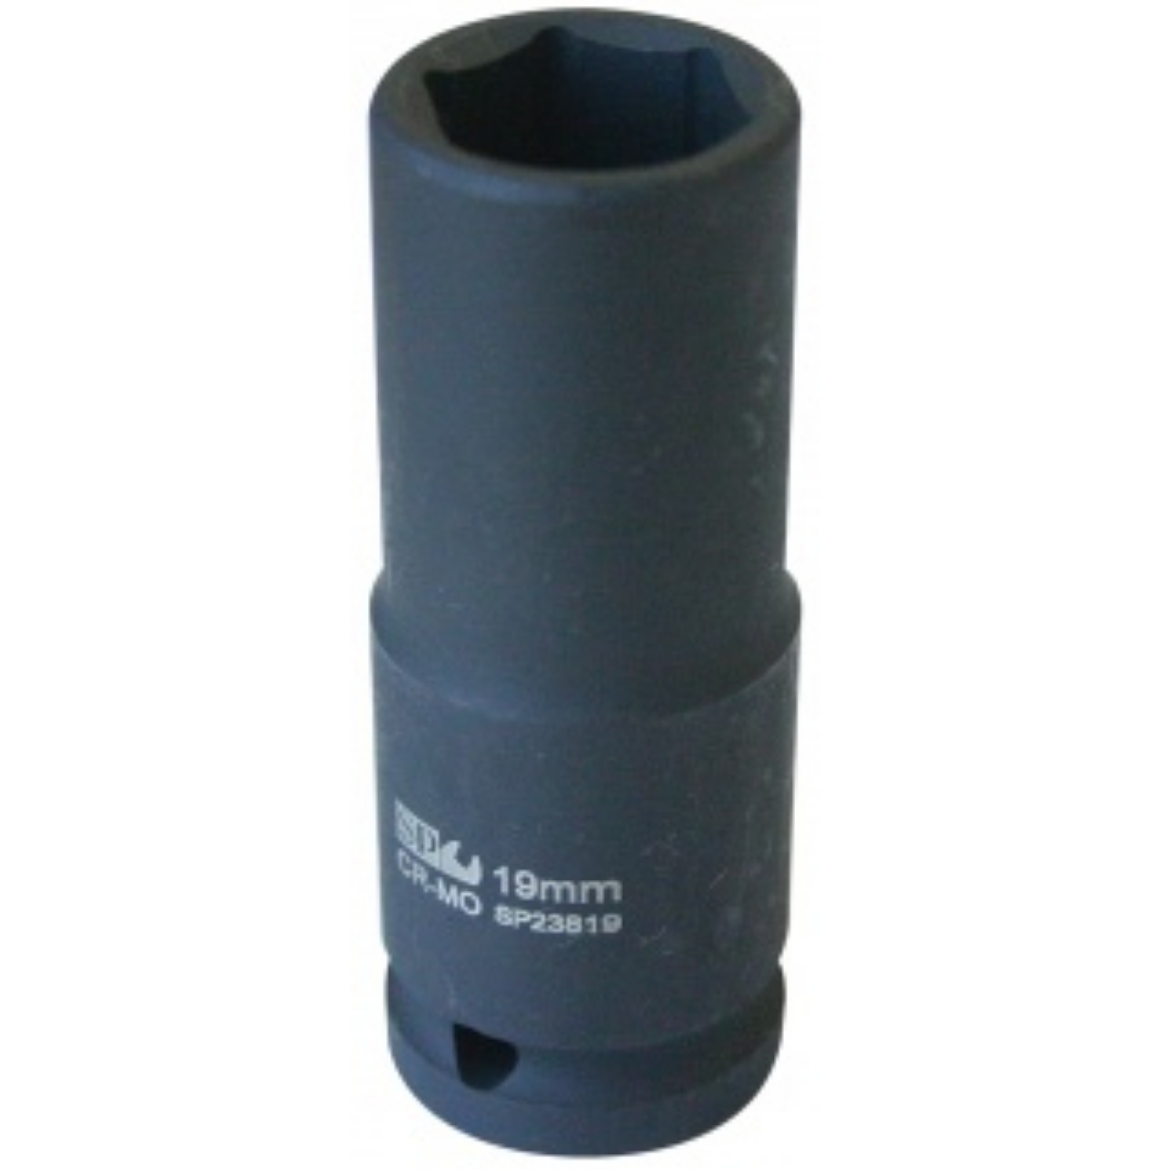 Picture of SOCKET IMPACT 1/2" DR 6PT DEEP METRIC 18MM SP TOOLS